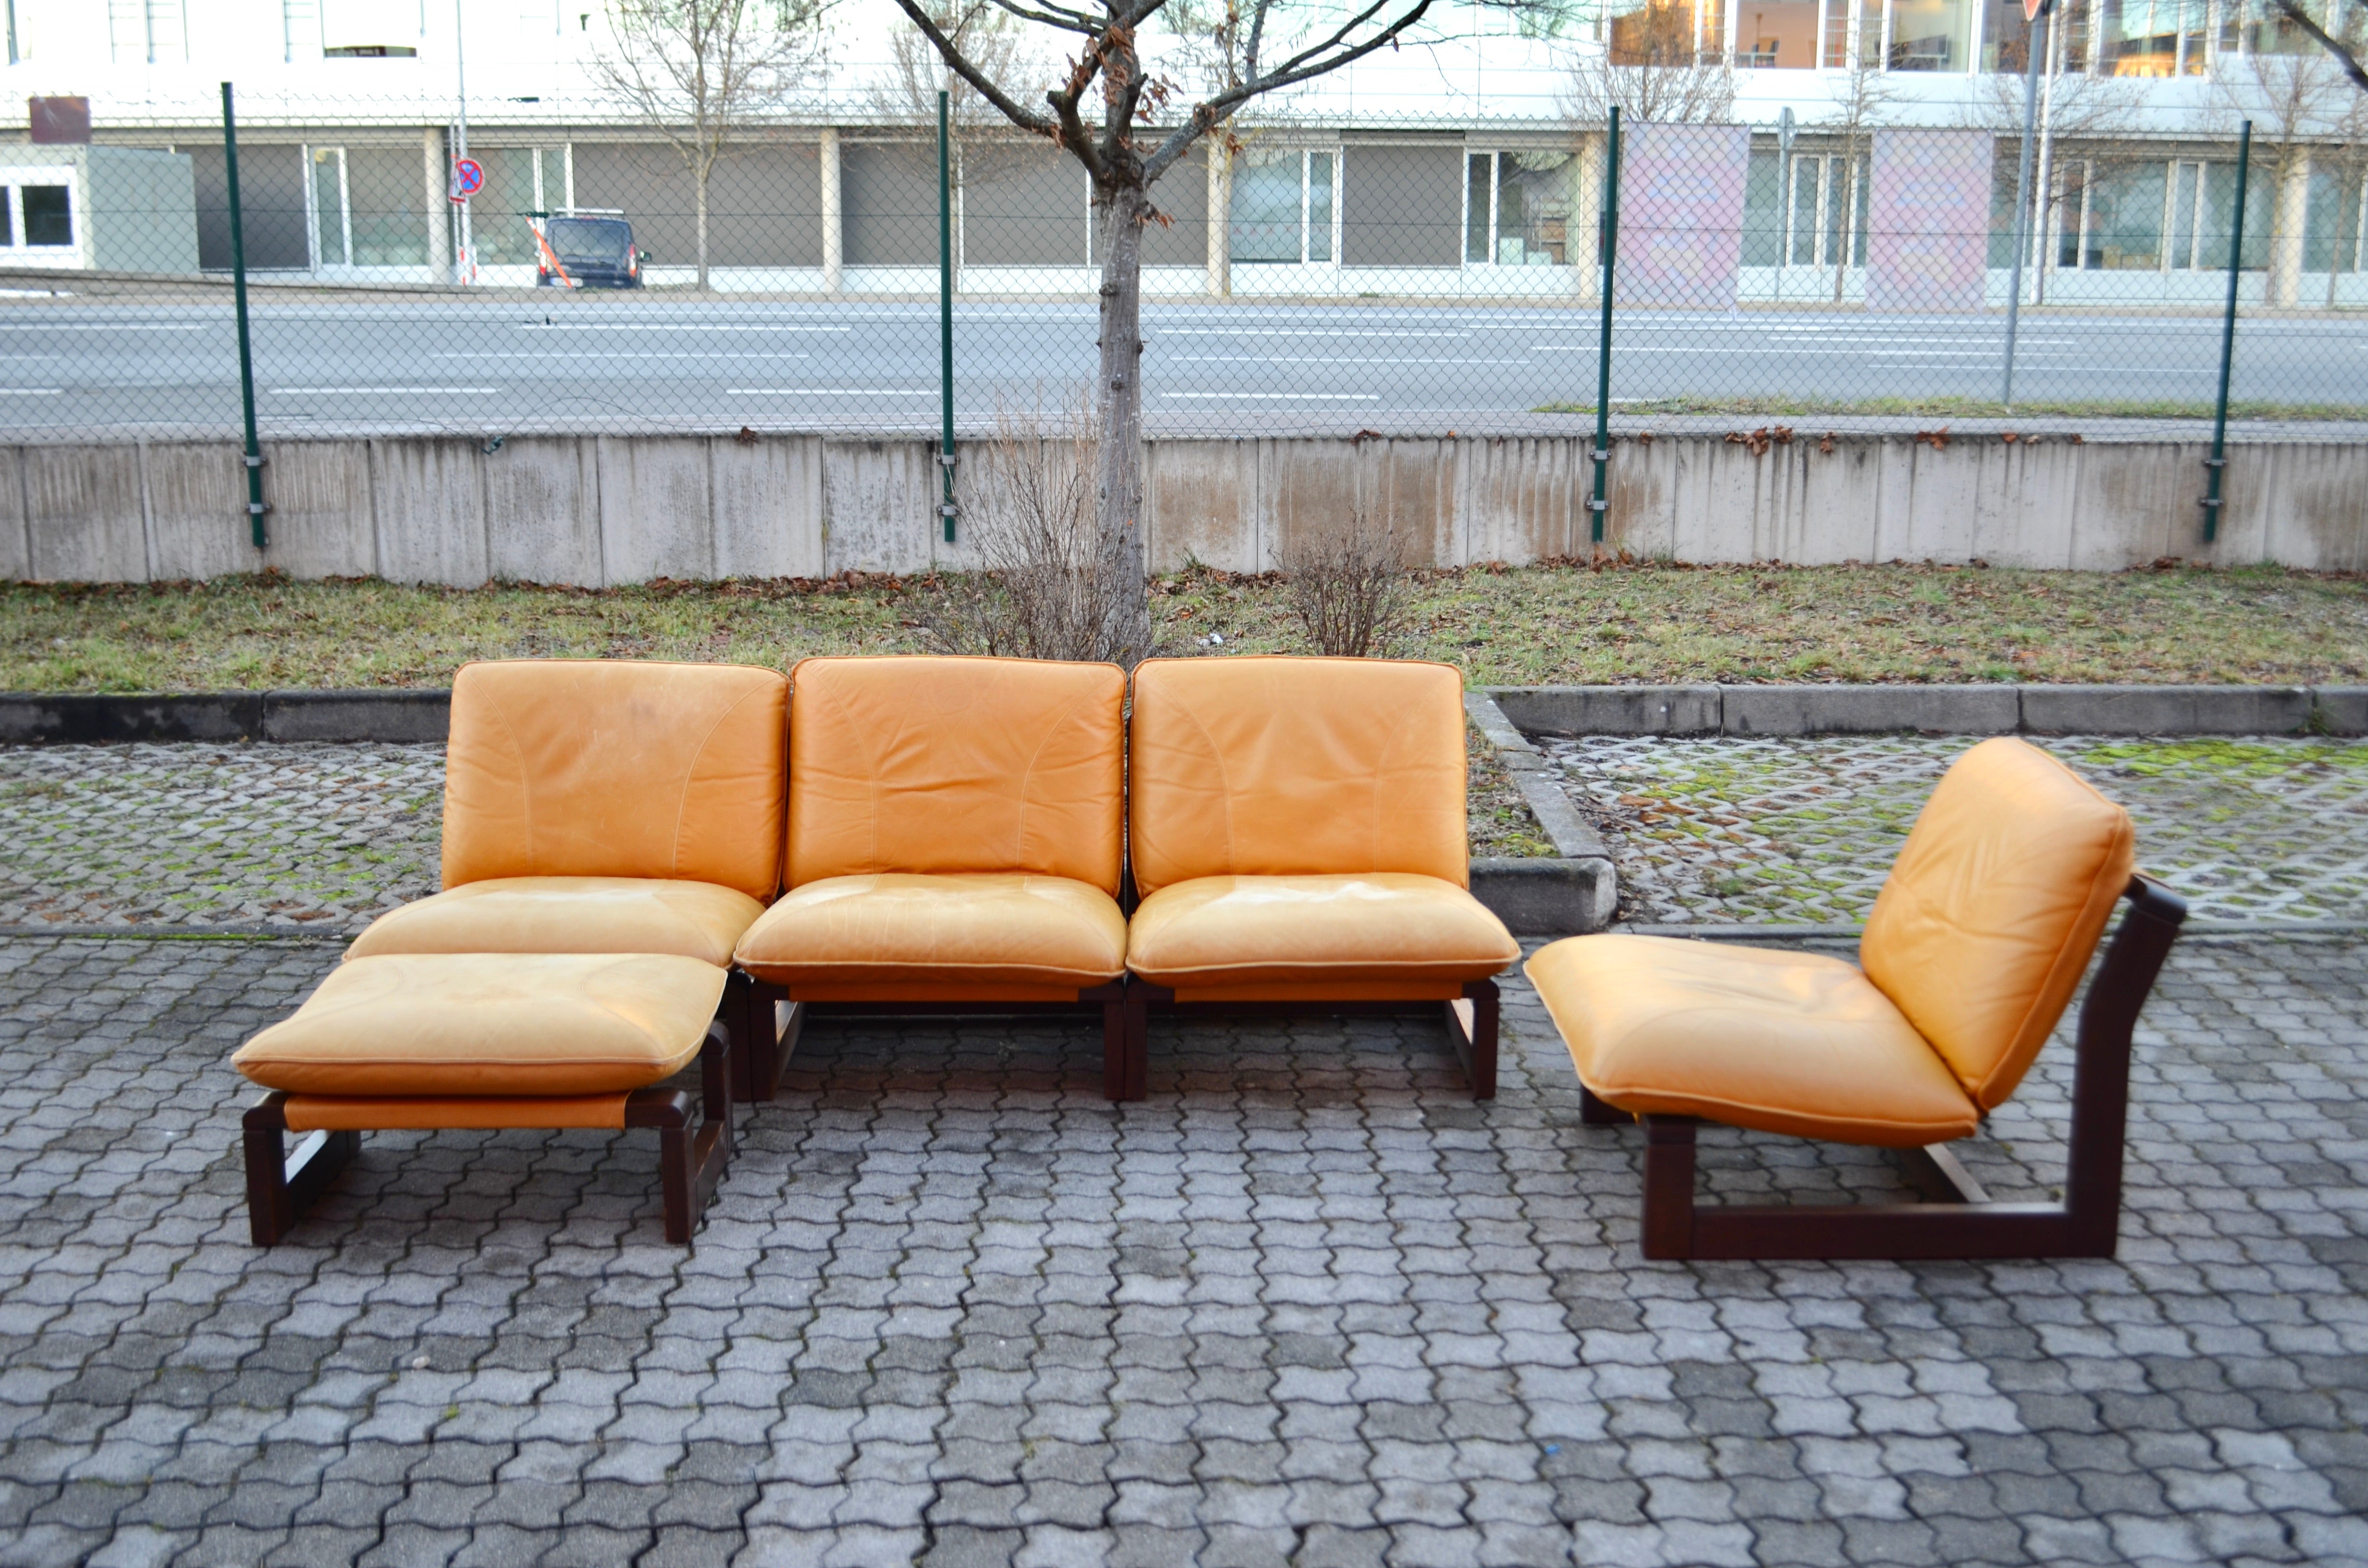 This unique and gorgeous modular sectional sofa from the 70ties was manufactured in germany by Dreipunkt International.
The Sling shape is made of cognac leather and canvas.
The loose and thick cushions made it so comfortable. It is a aniline cognac